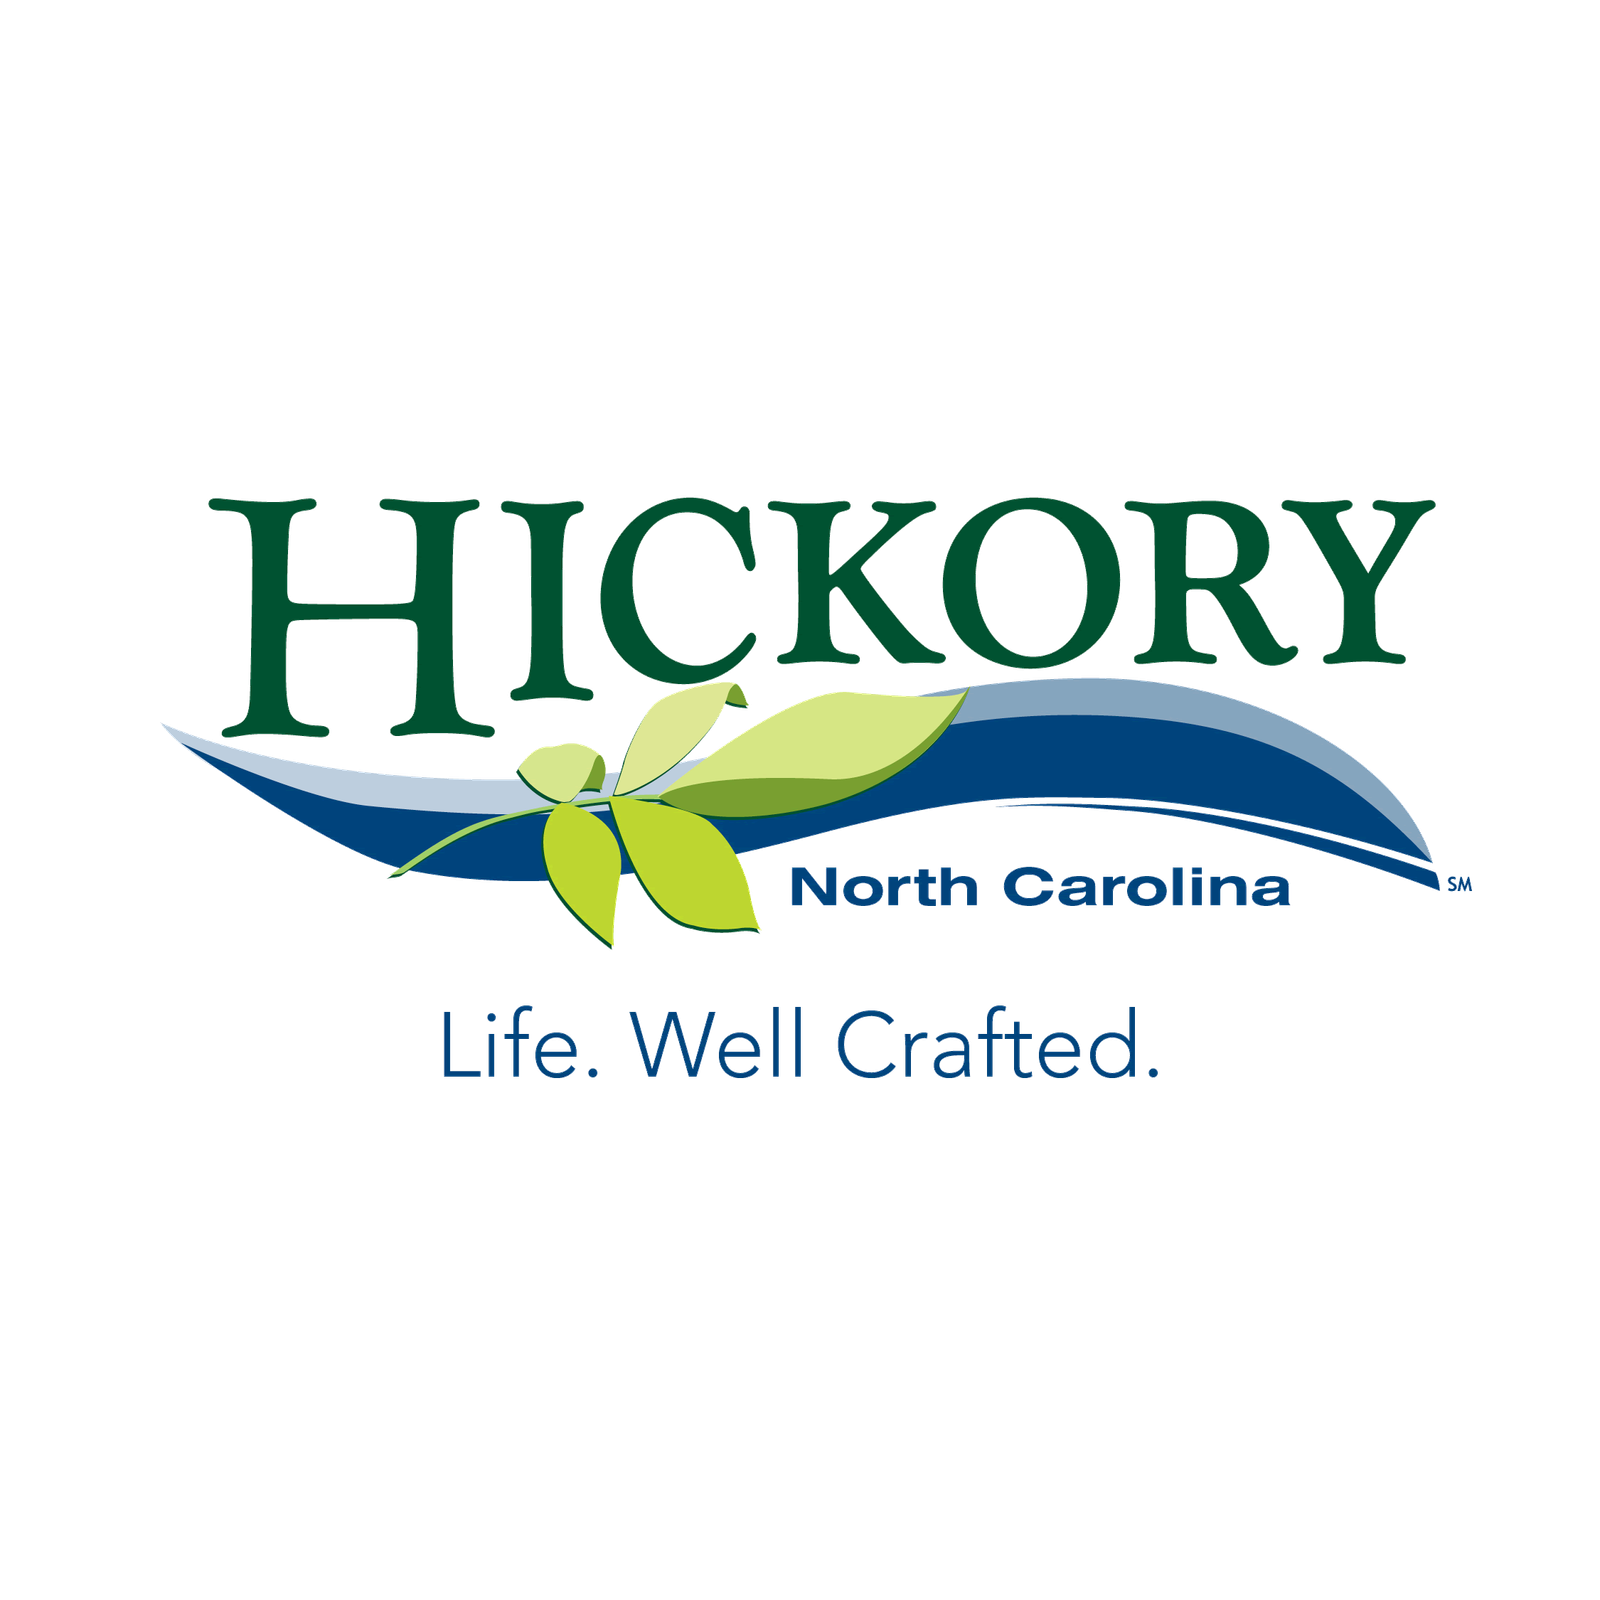 Points to consider before buying a home in Hickory NC